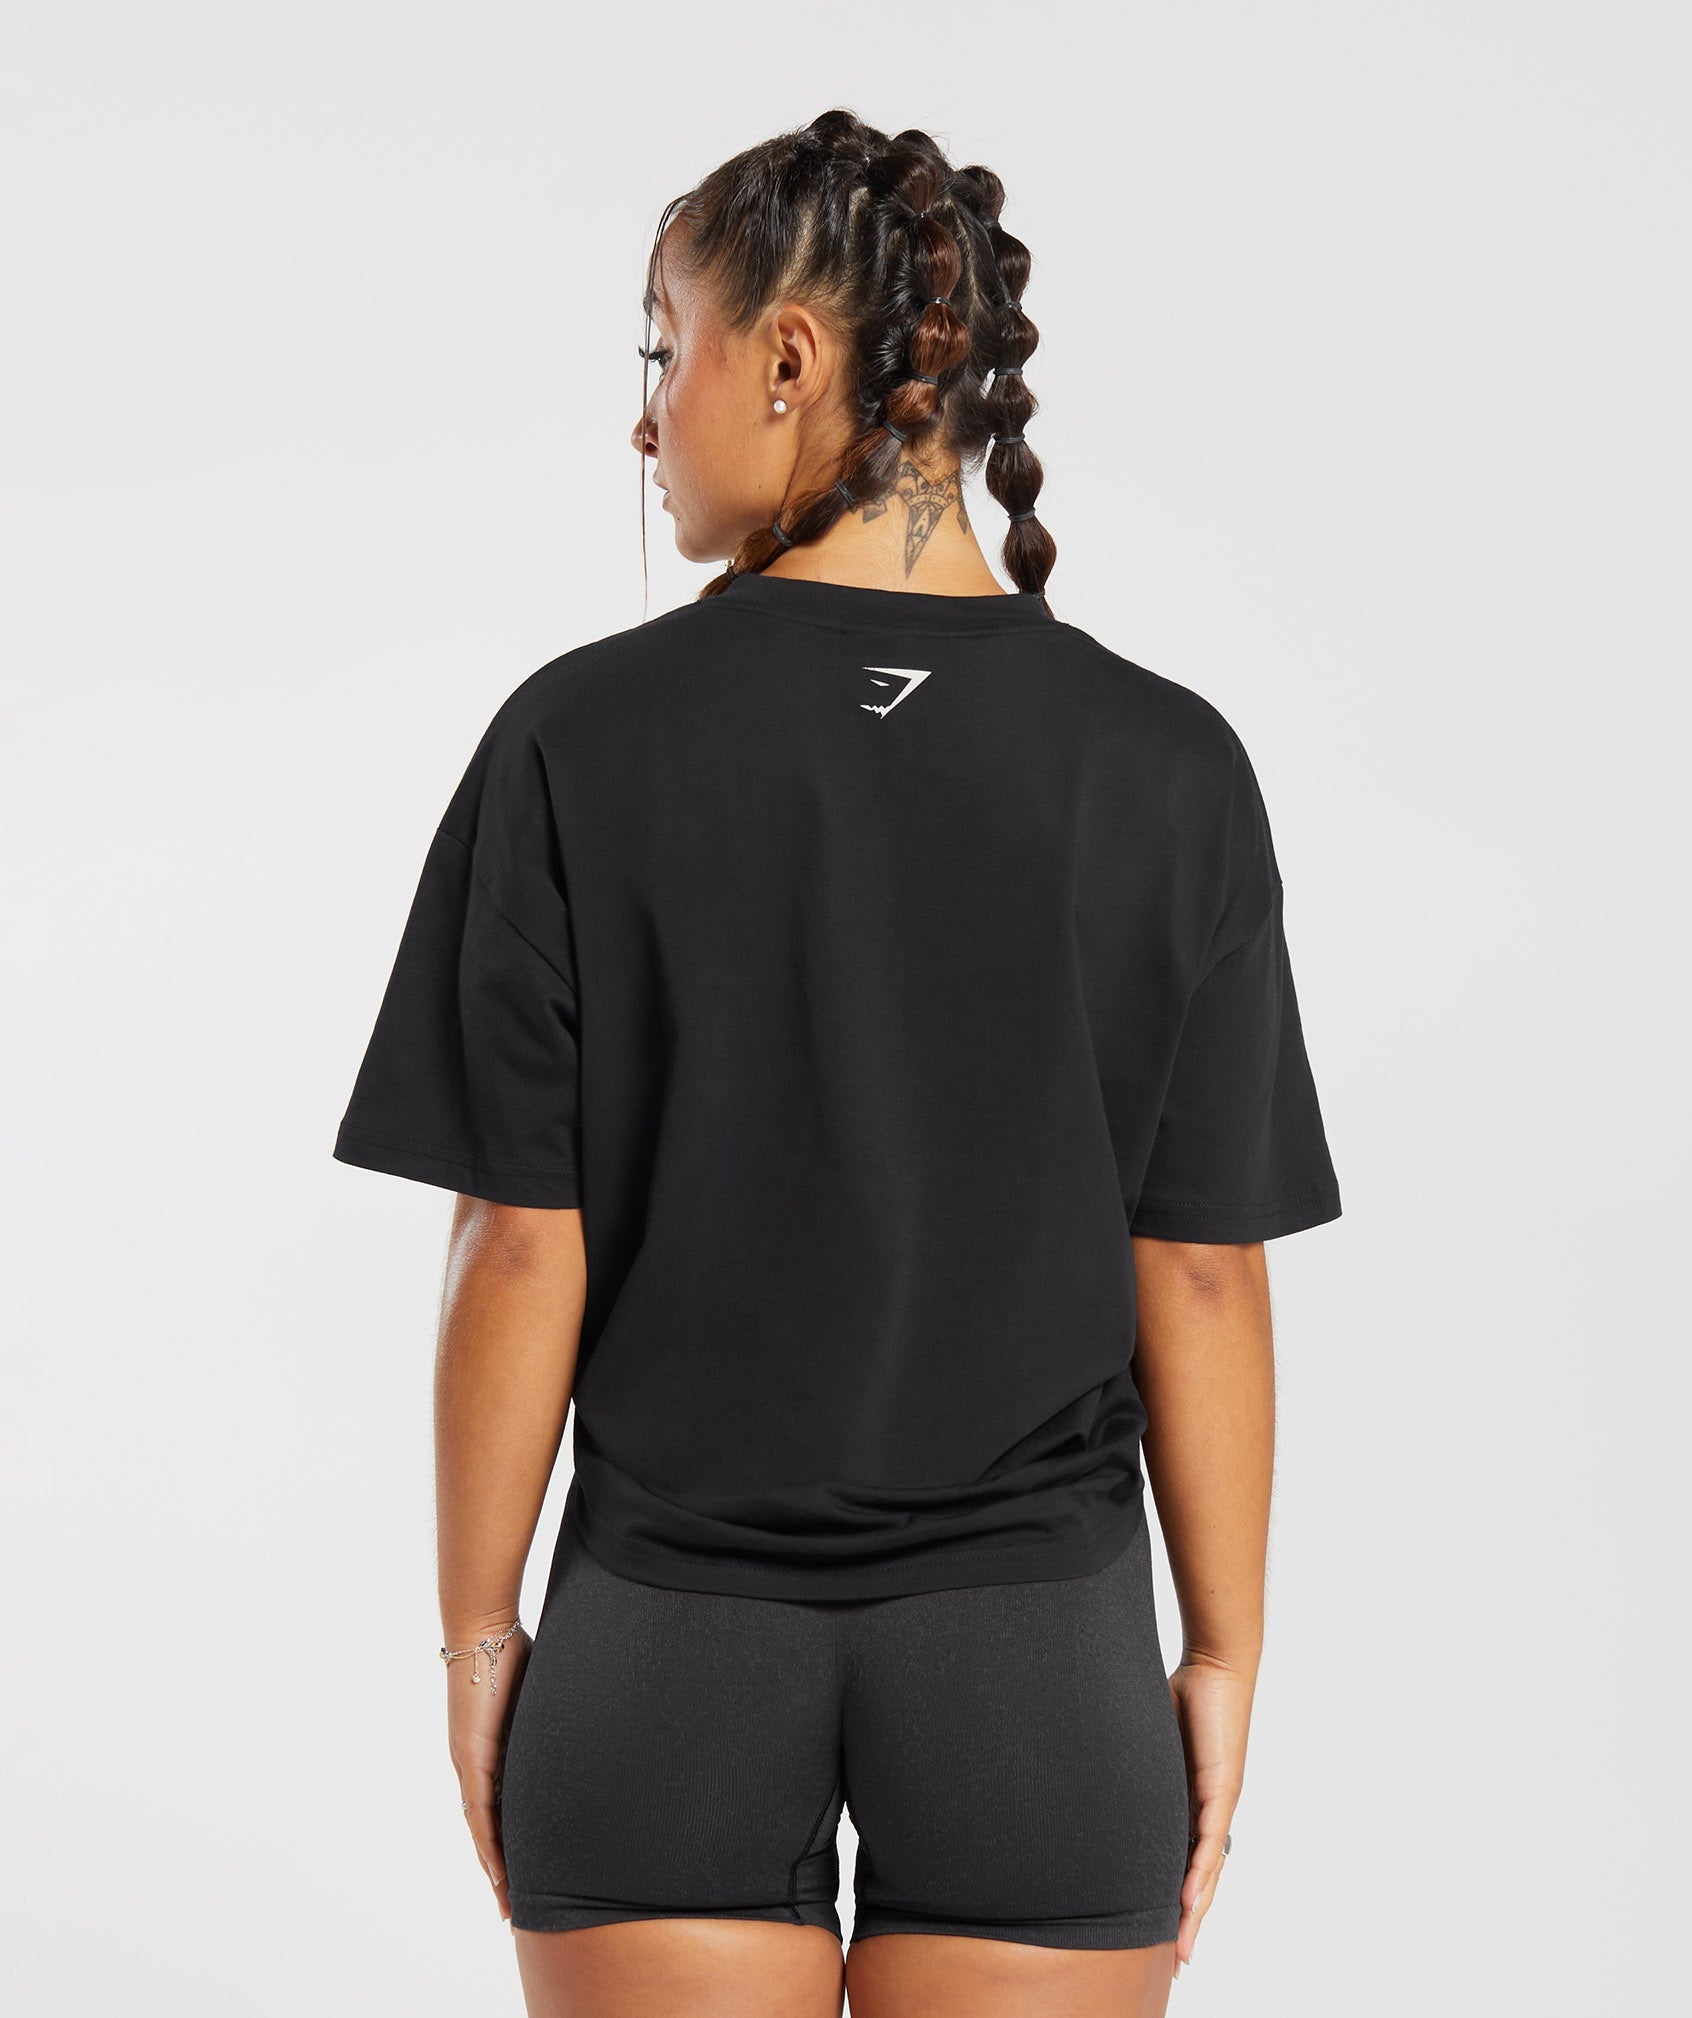 Lifting Essentials Oversized T-shirt in Black - view 2